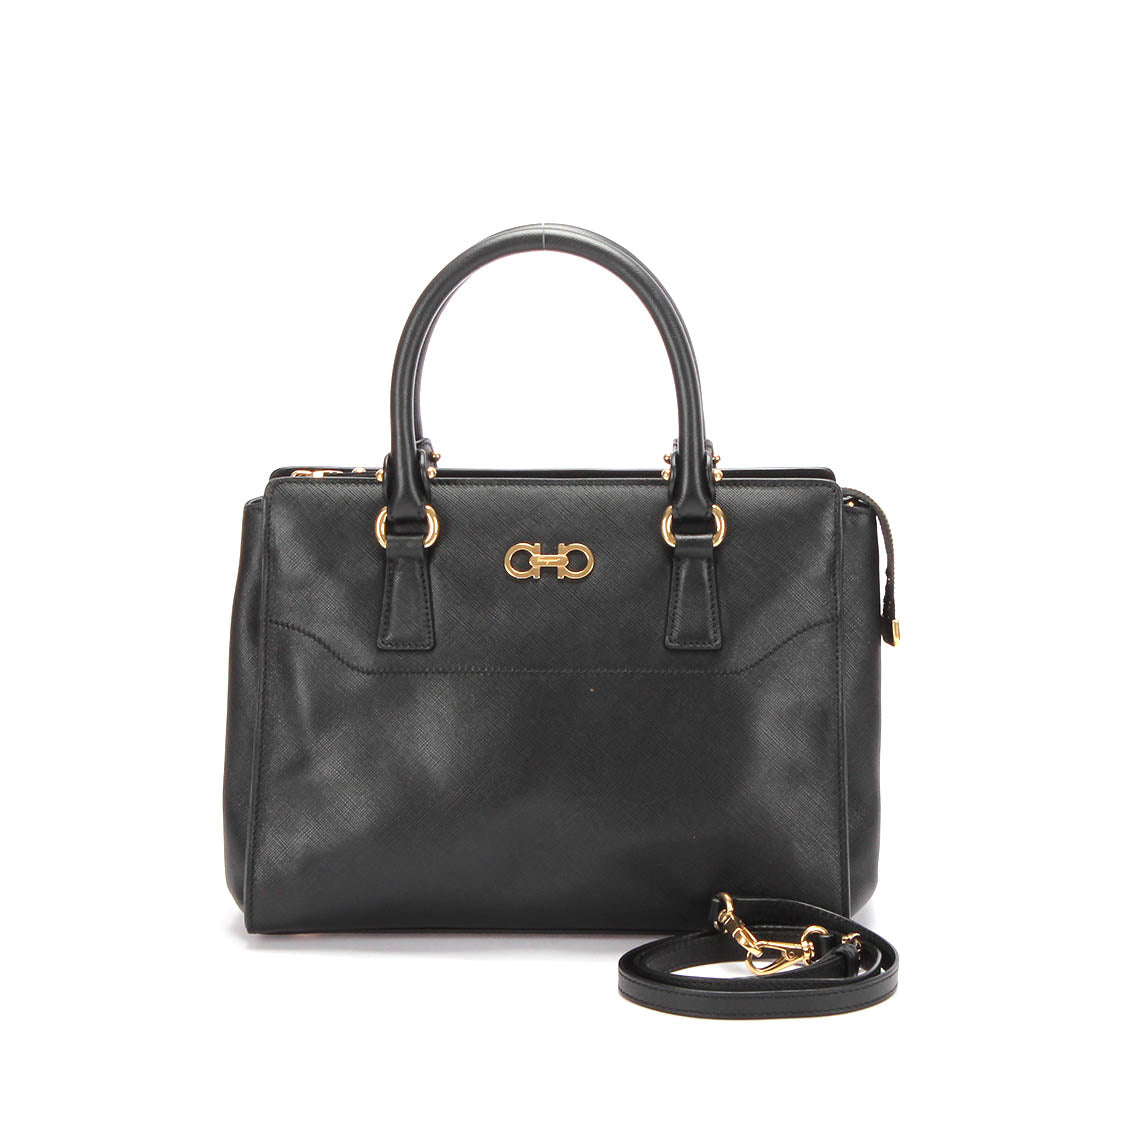 Bey Leather Shourdle Bag